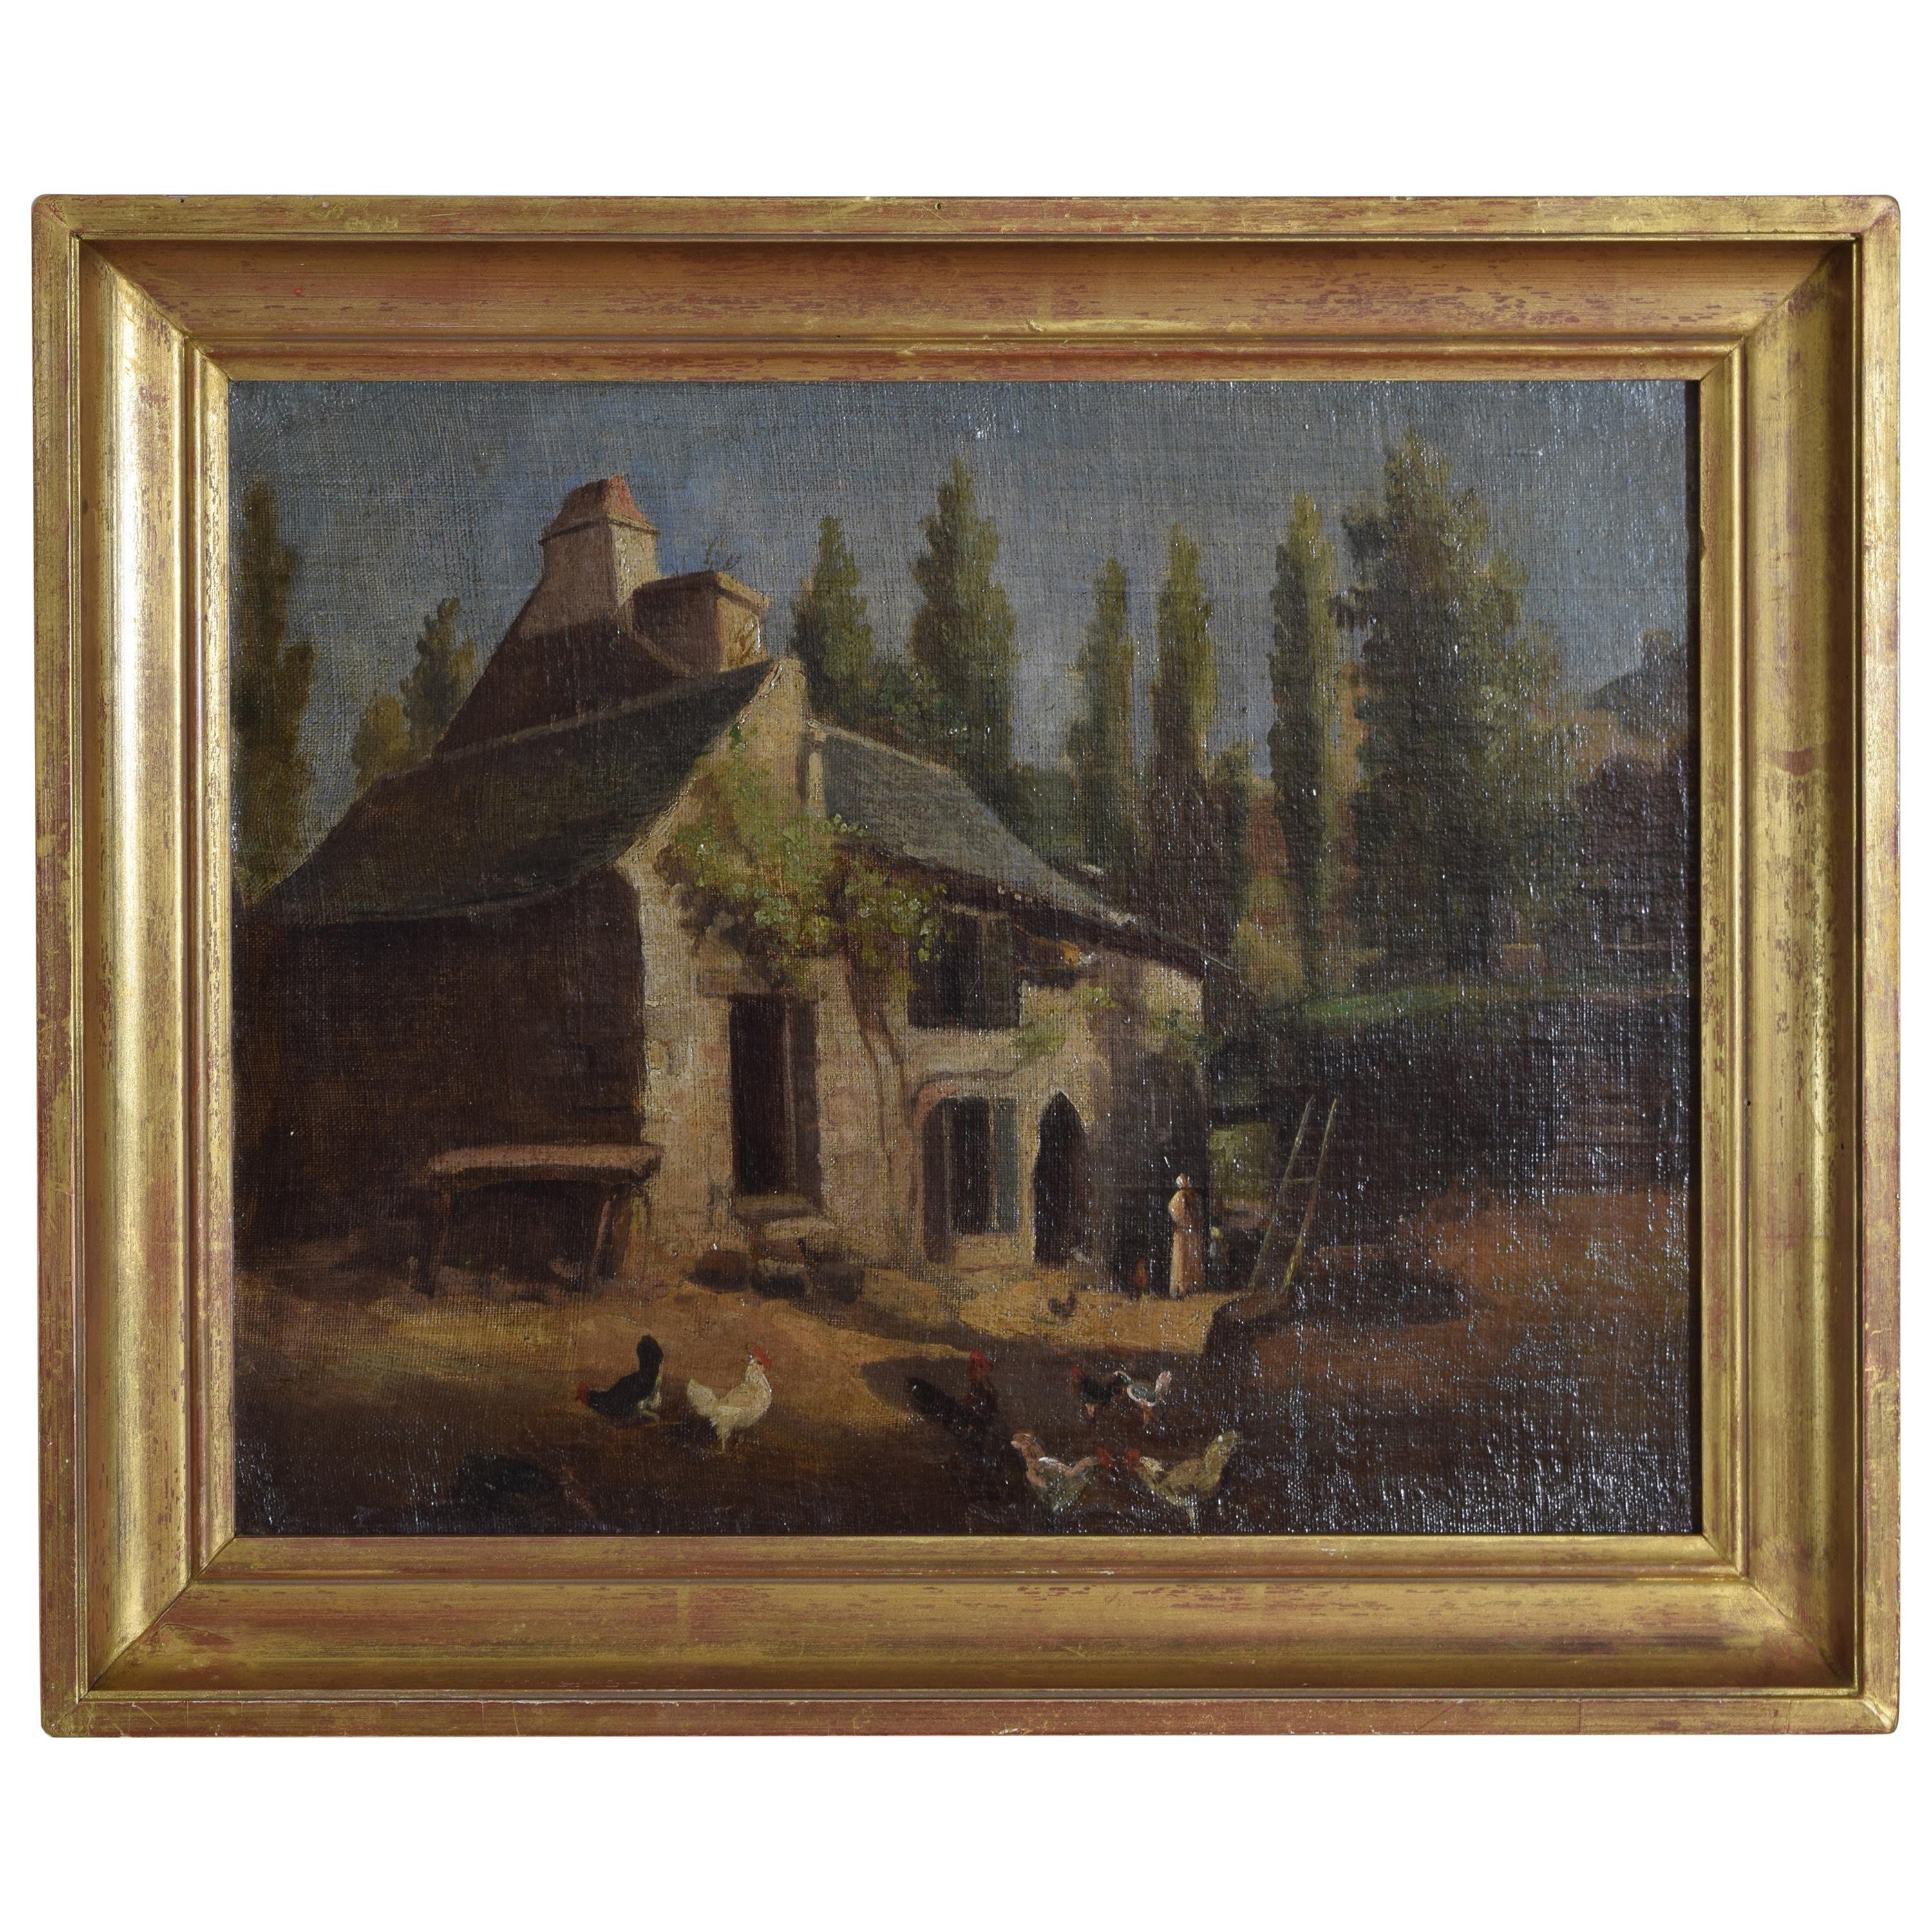 French Oil on Canvas, Farmhouse with Figures and Fowl, 19th Century